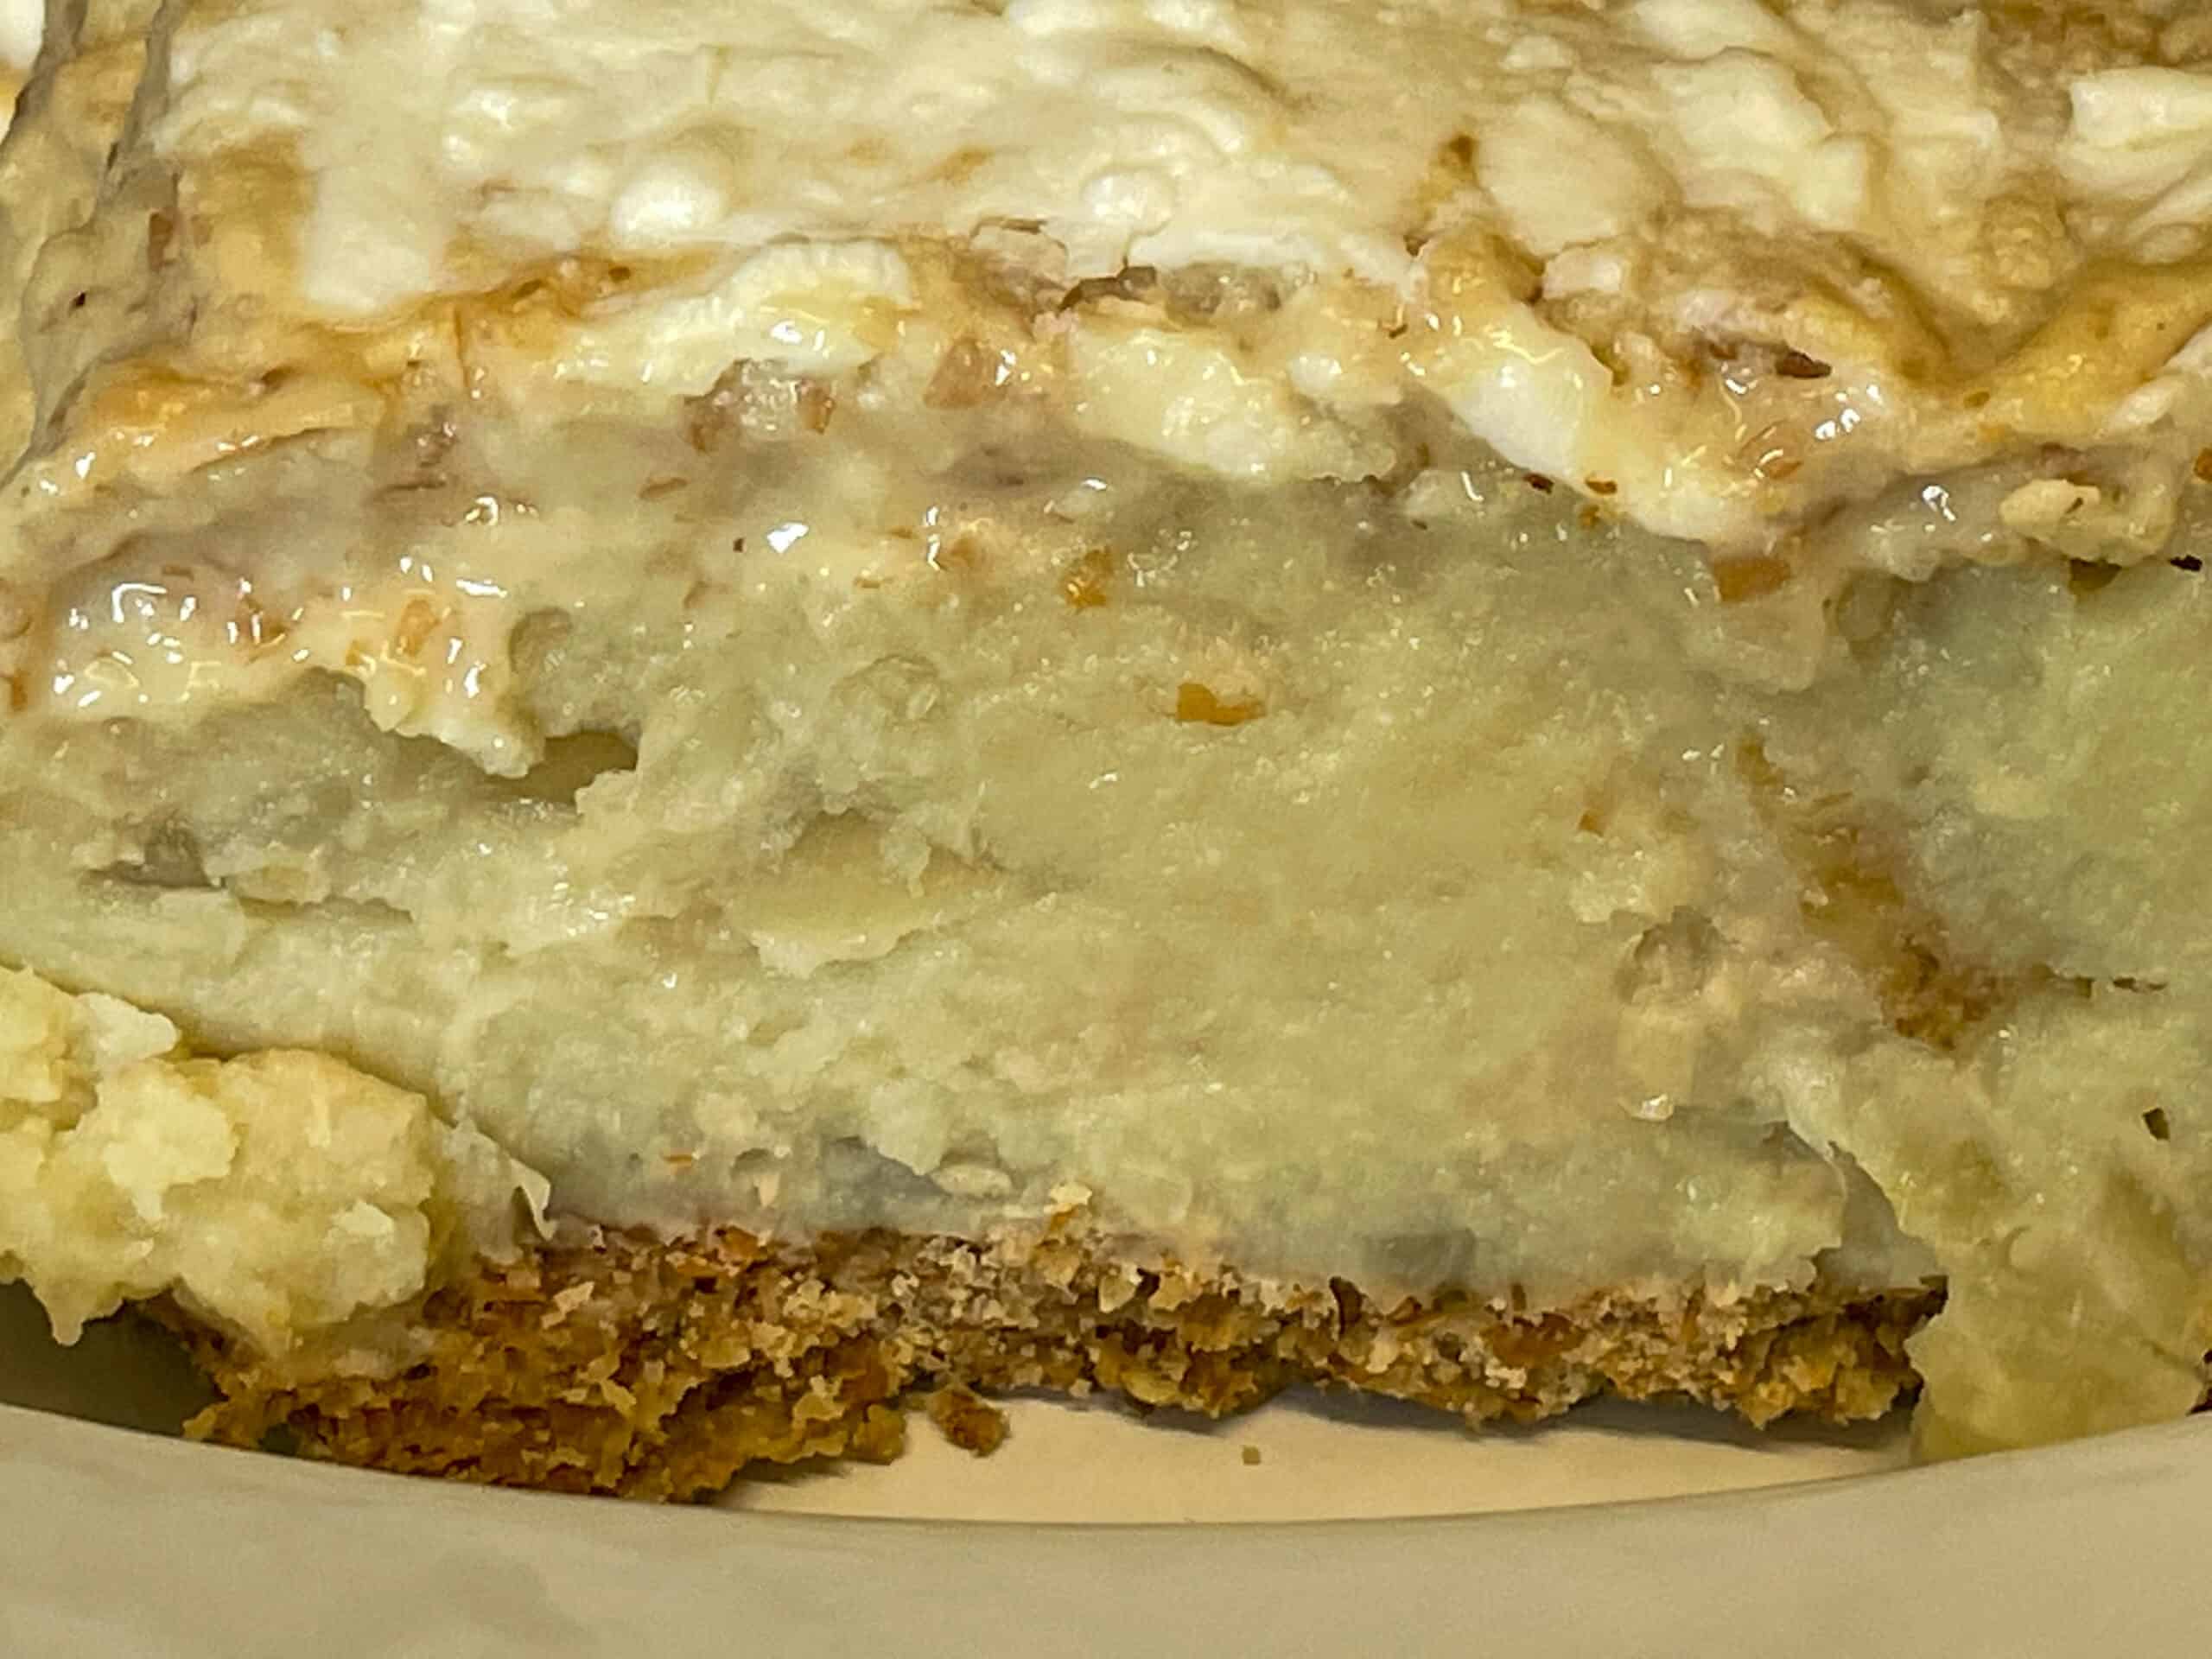 A close up of a slice of pie showing the potato filling and pastry crust.